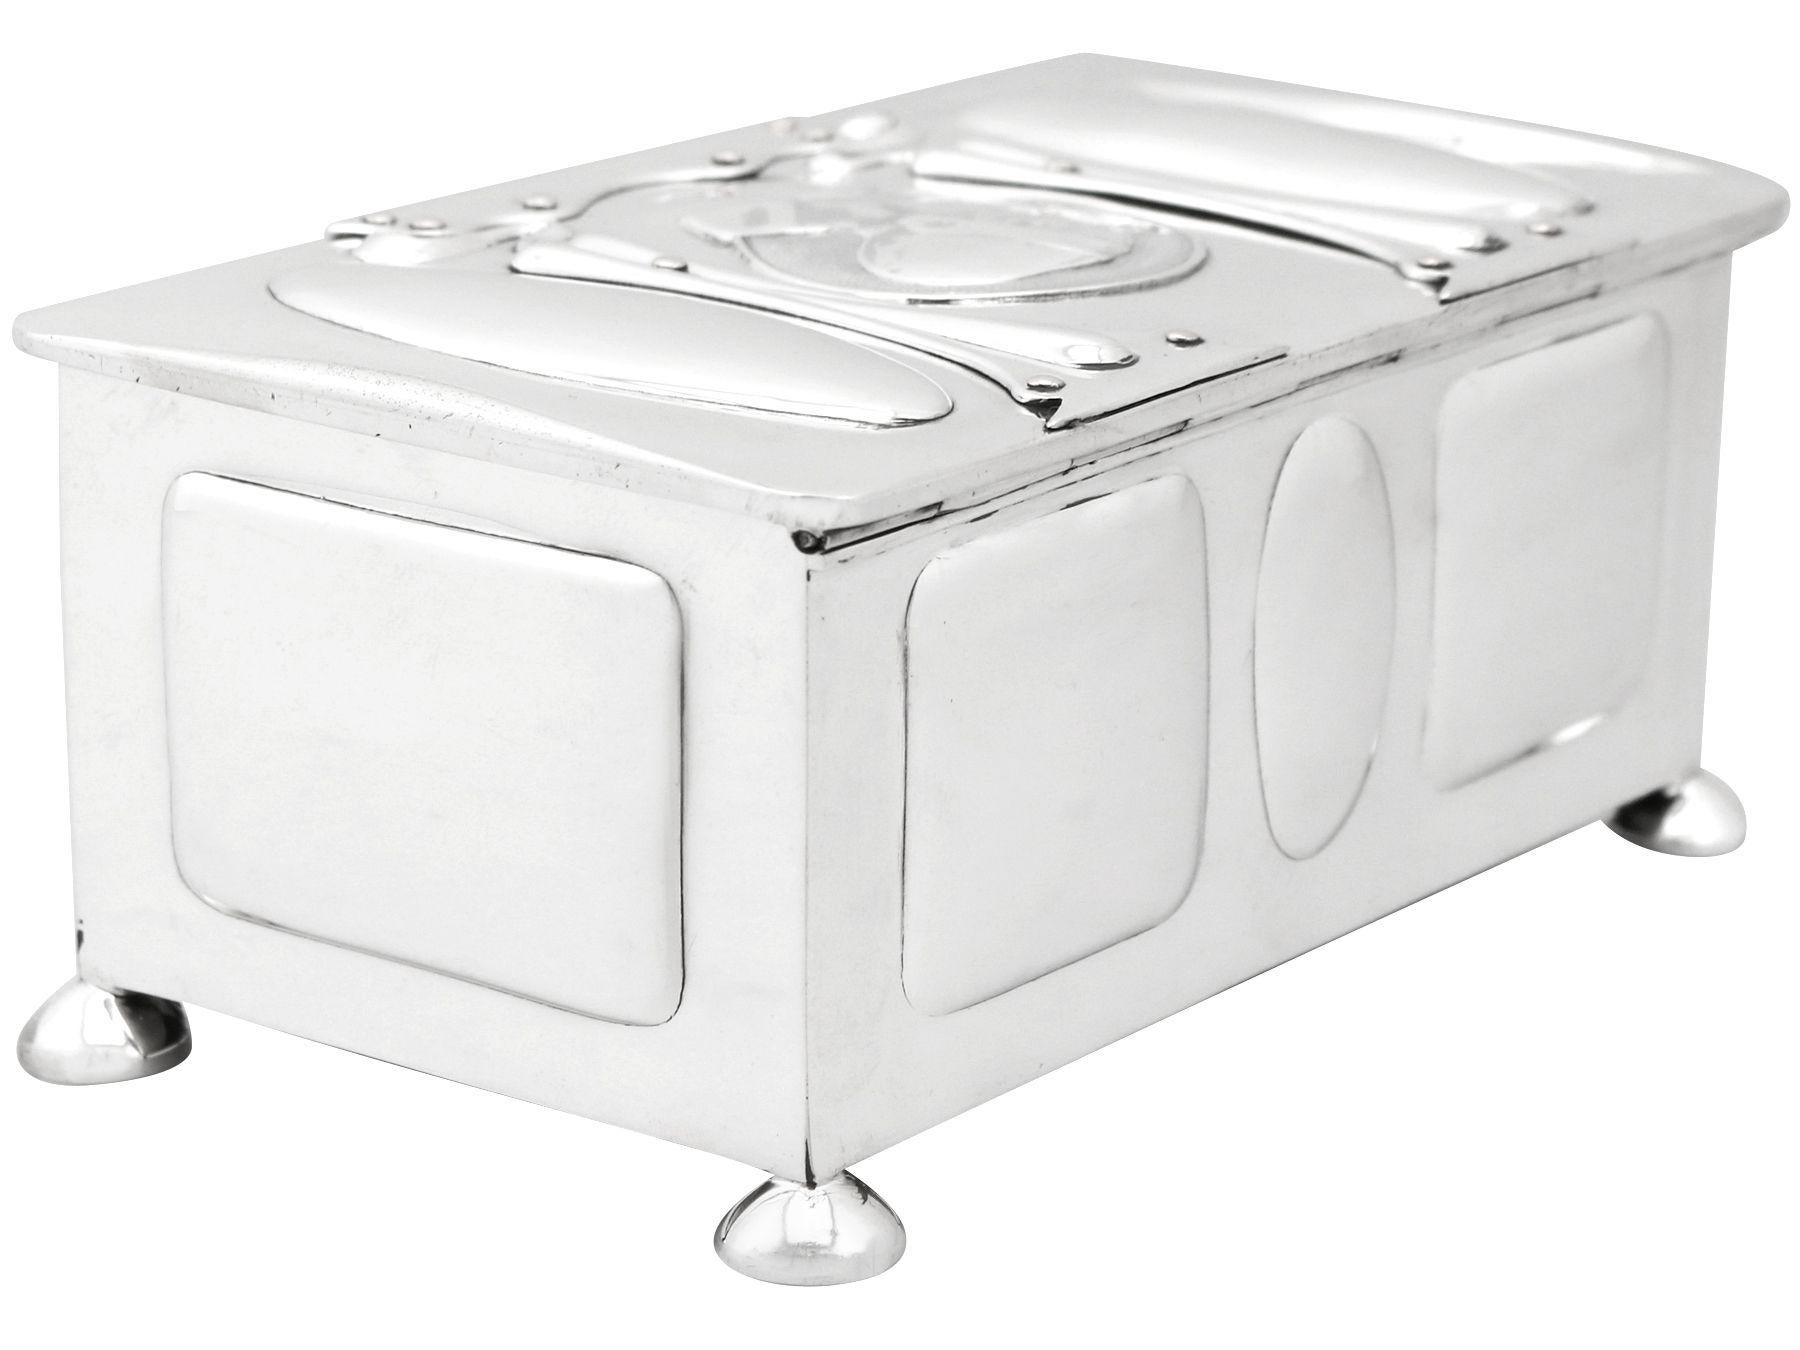 Early 20th Century Antique Edwardian Art Nouveau Style Sterling Silver Jewelry Casket For Sale